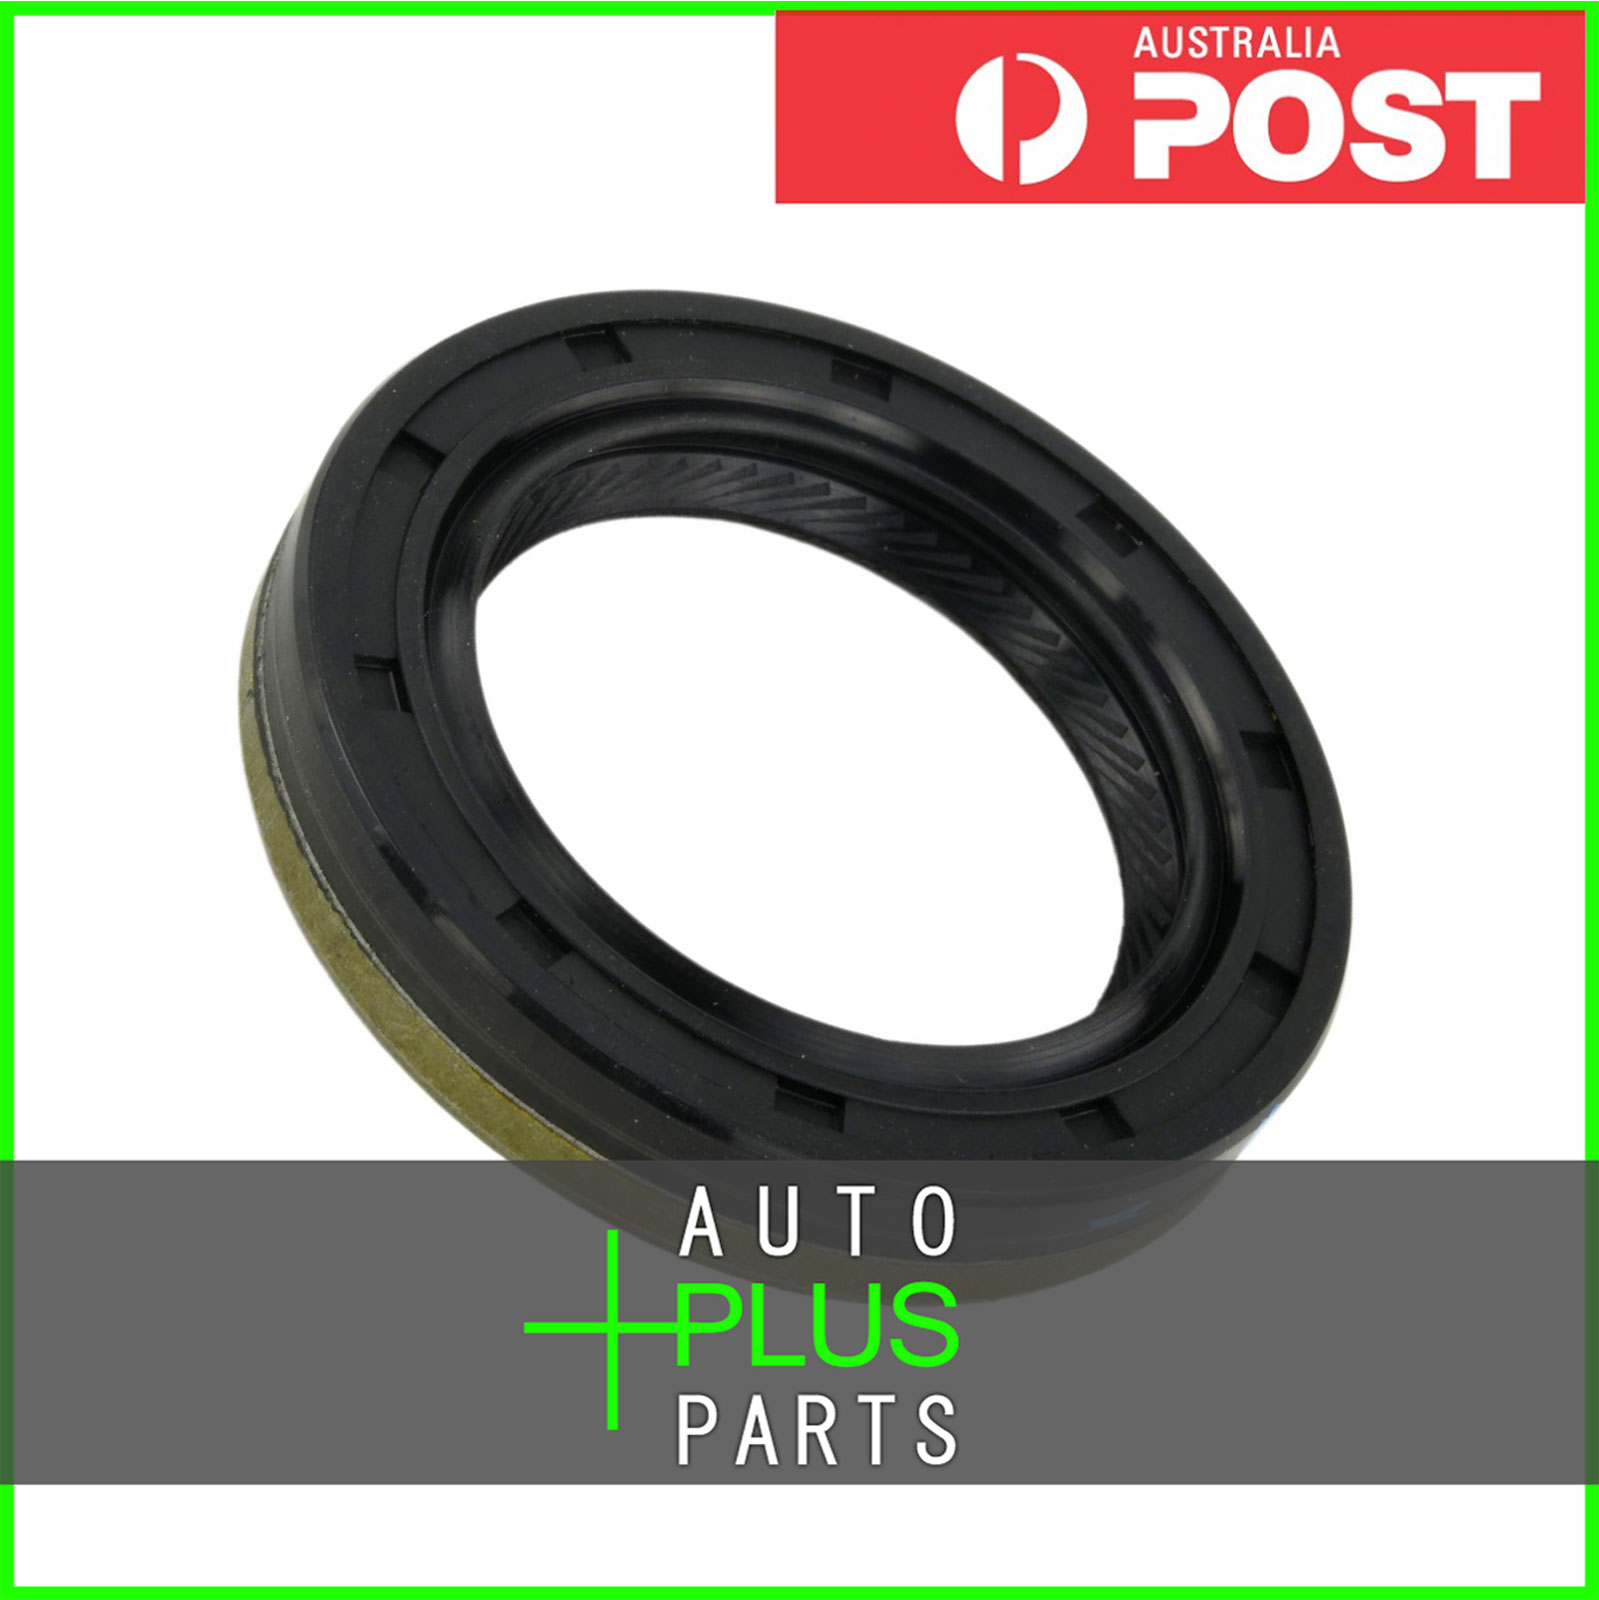 Fits MERCEDES BENZ C 350 CDI BLUEEFFICIENCY / C 350 OIL SEAL TRANSAXLE CASE 30.7 Product Photo